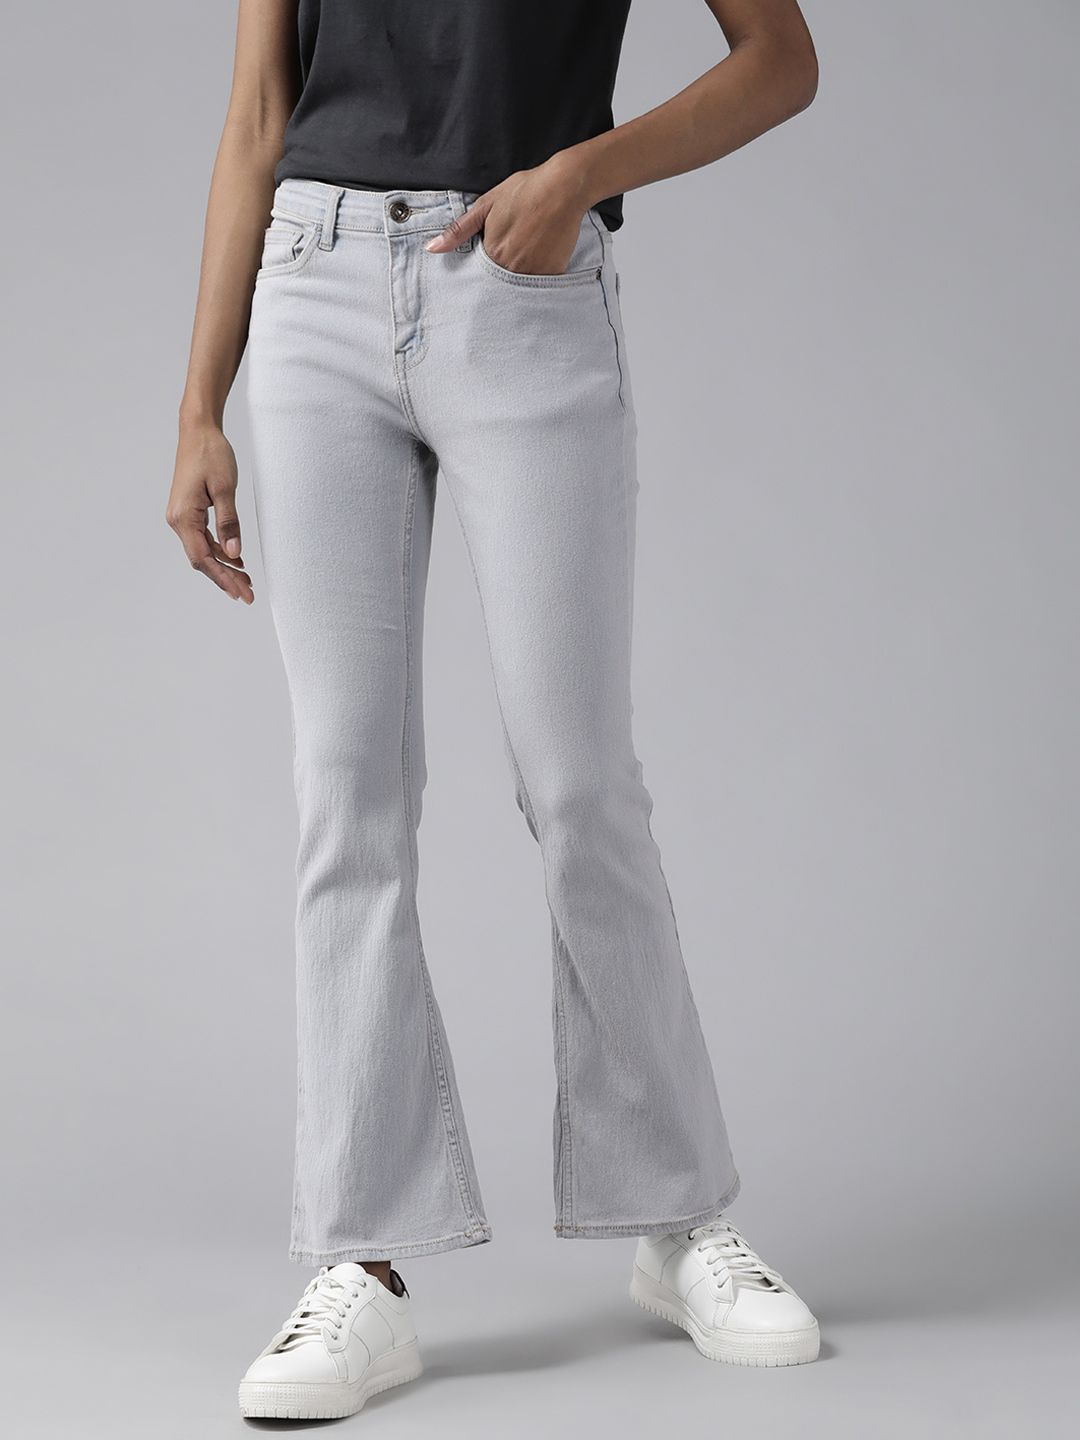 The Roadster Lifestyle Co Women Light Blue Flared High-Rise Stretchable Jeans Price in India